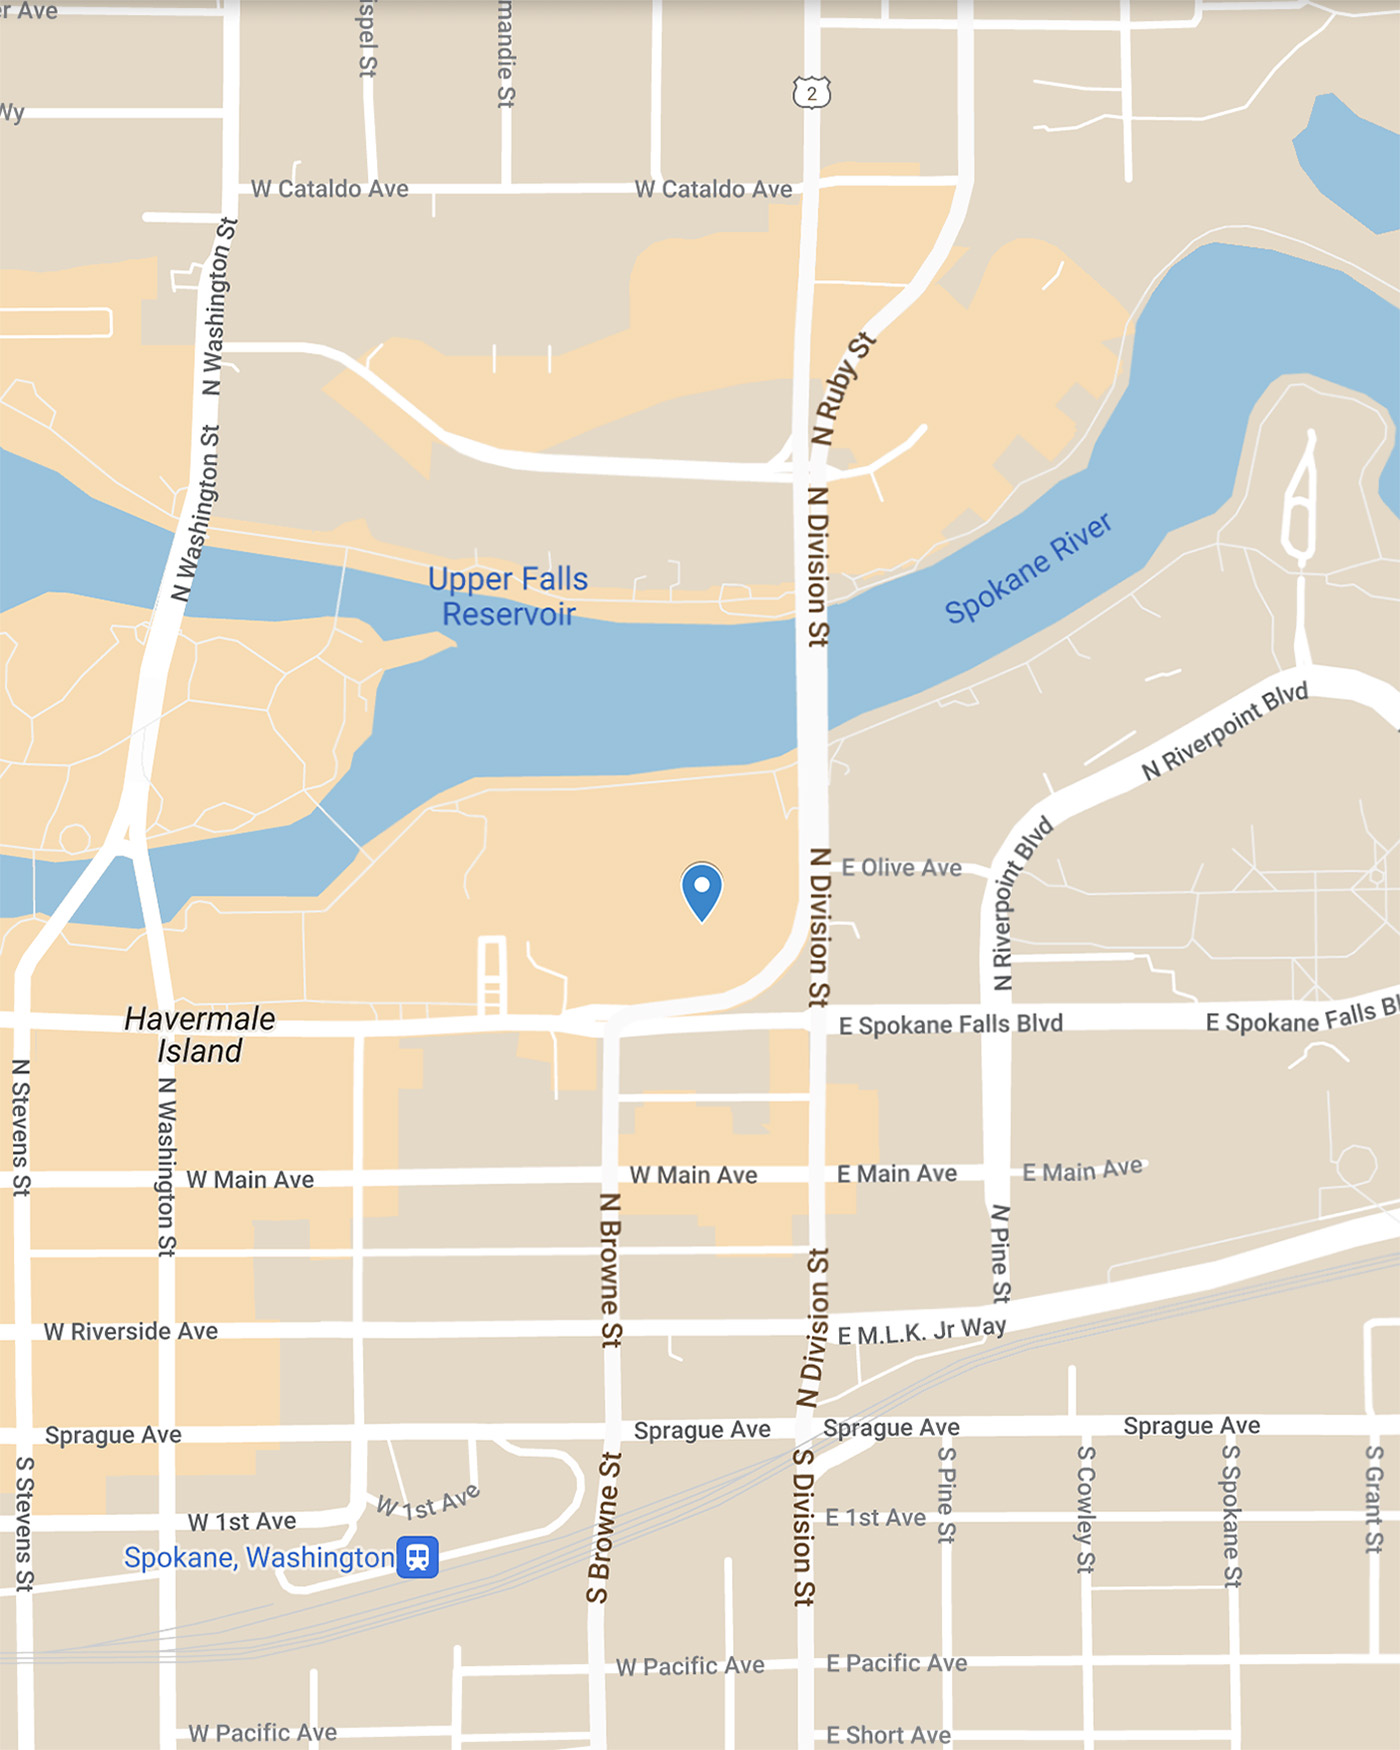 map of Spokane, WA showing the location of the Spokane Convention Center